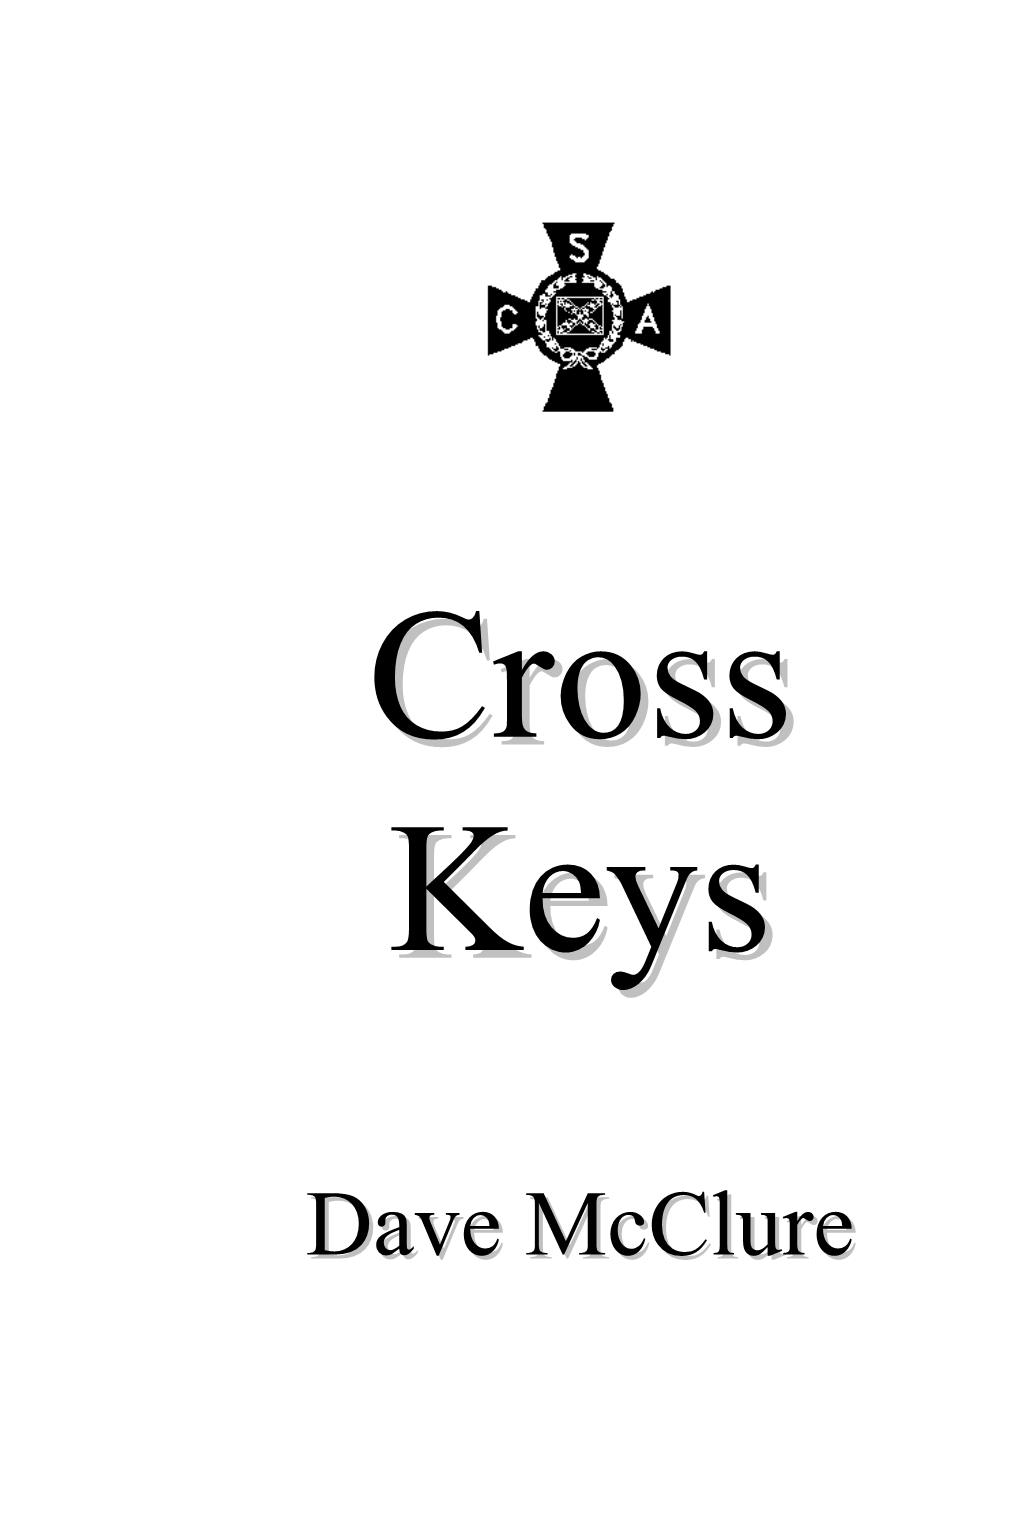 Cross Keys © Copyright 2012, Dave Mcclure First Publication March, 2012